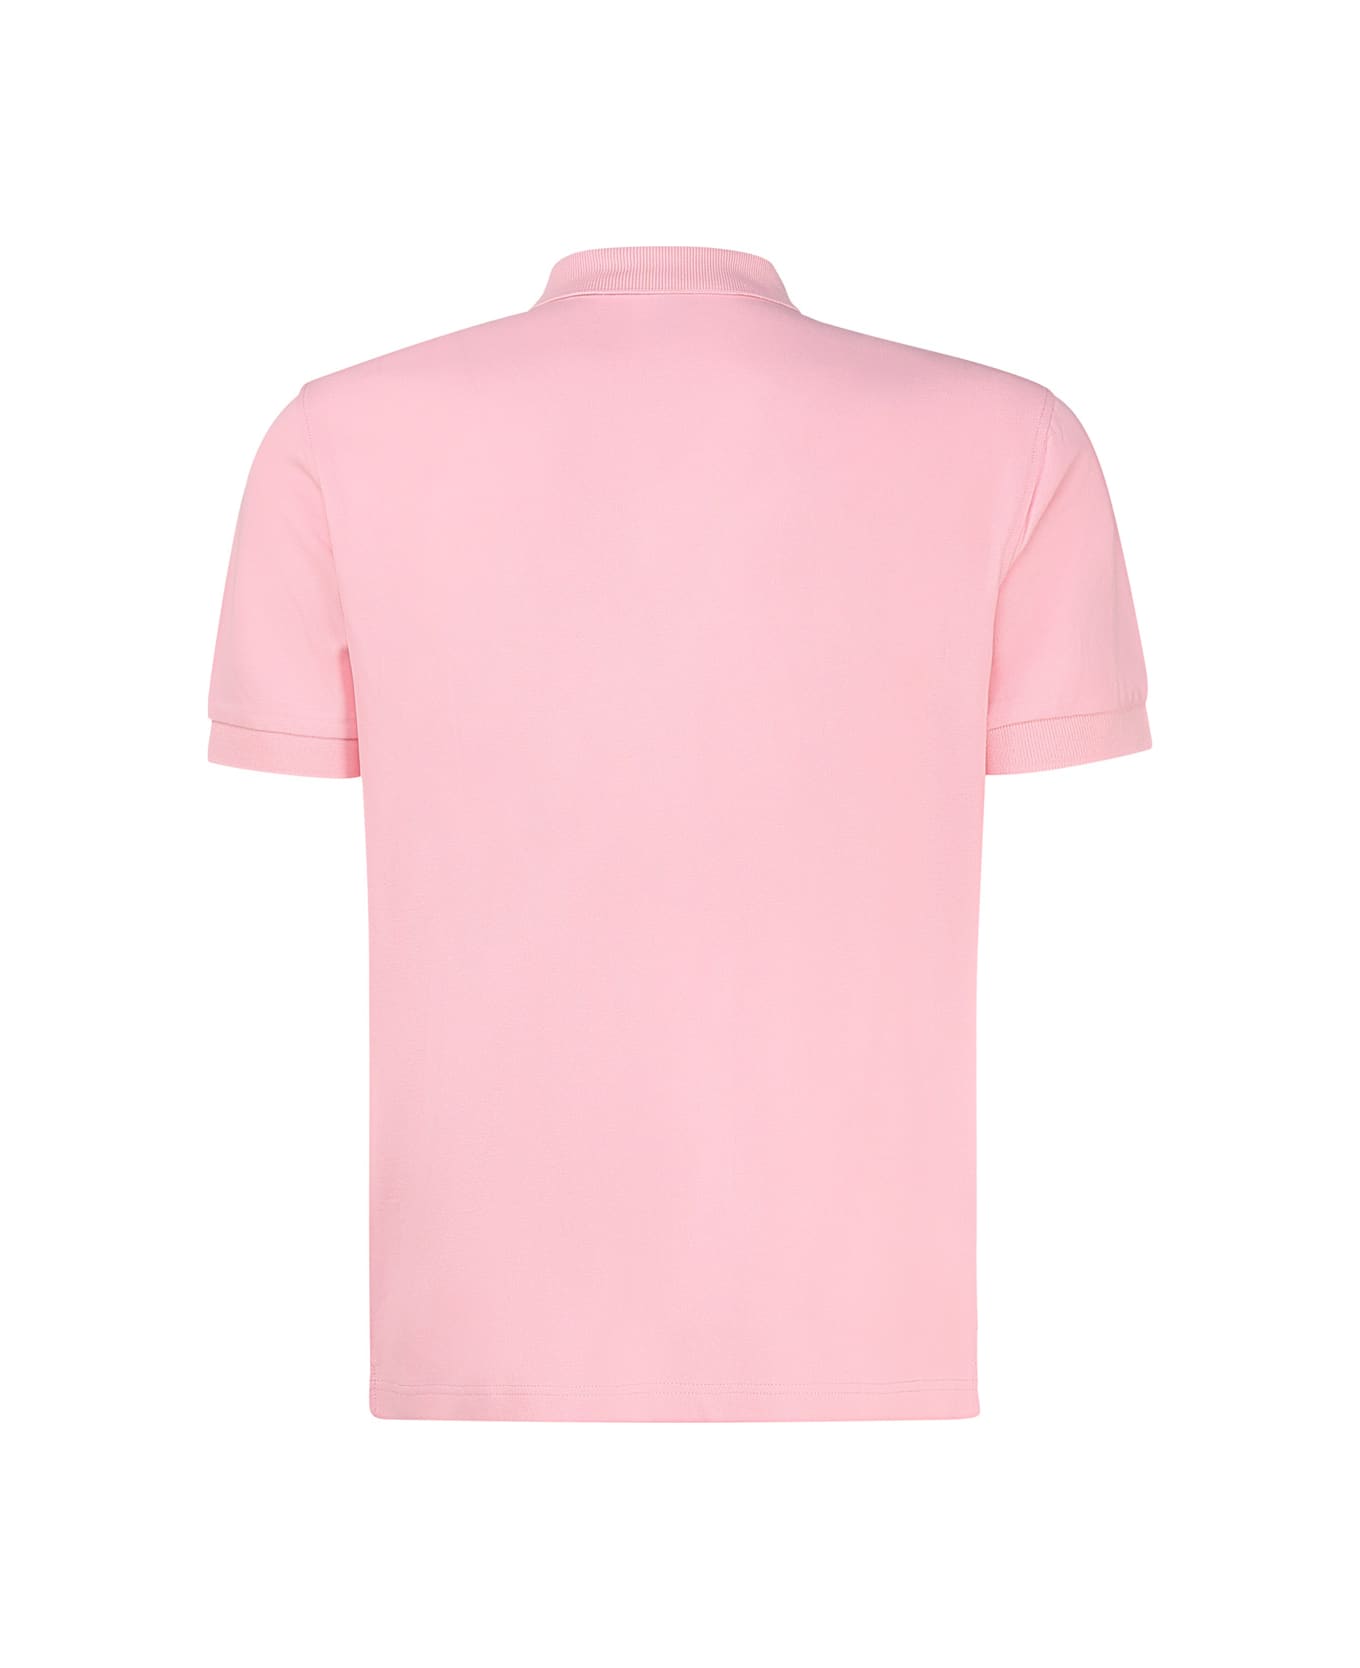 Sun 68 Polo Solid - Pink